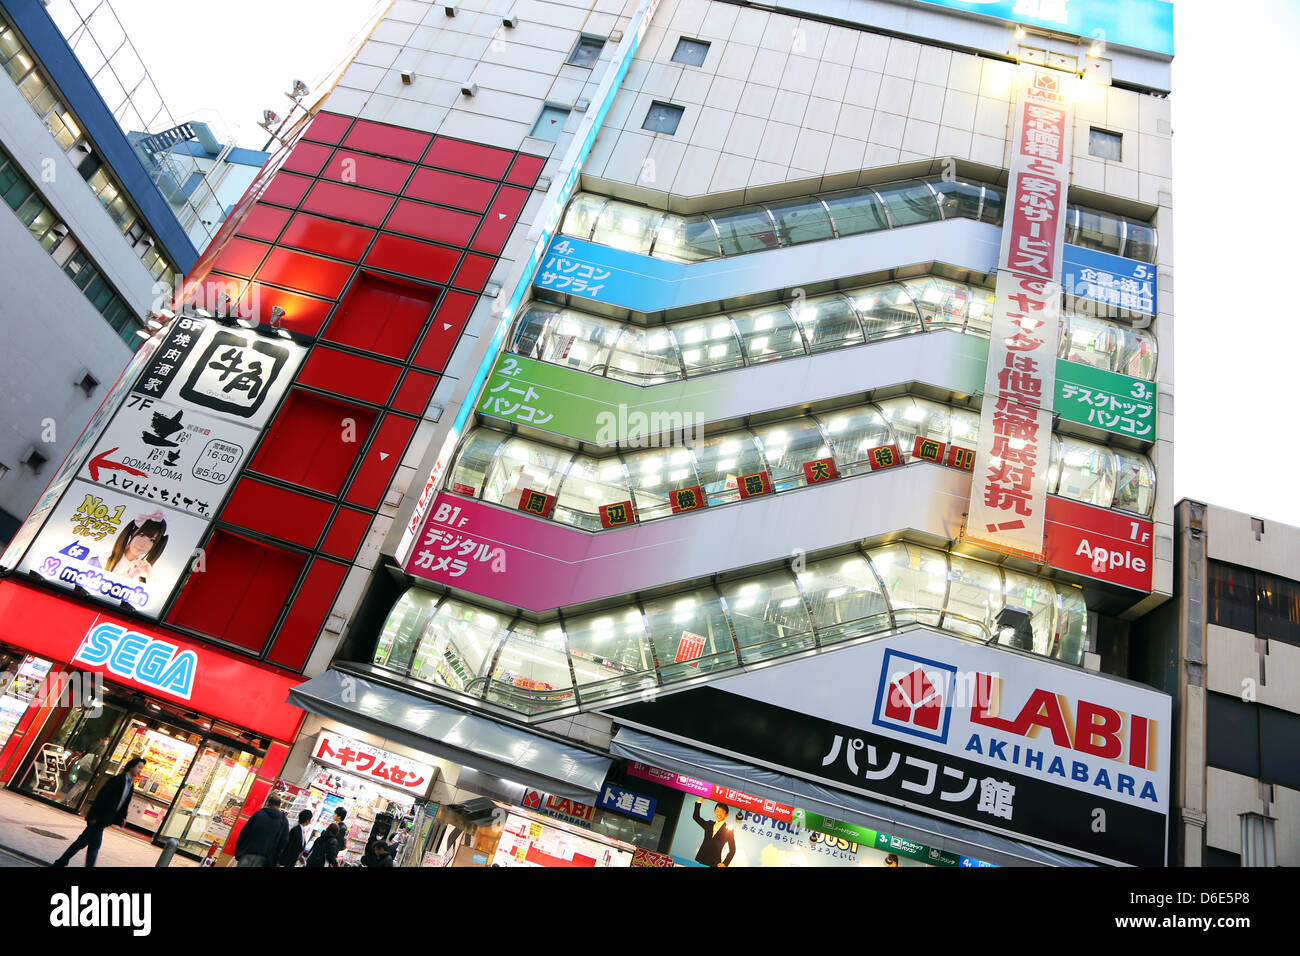 Lights of shops and buildings of Akihabara Electric Town street scene in Tokyo, Japan Stock Photo